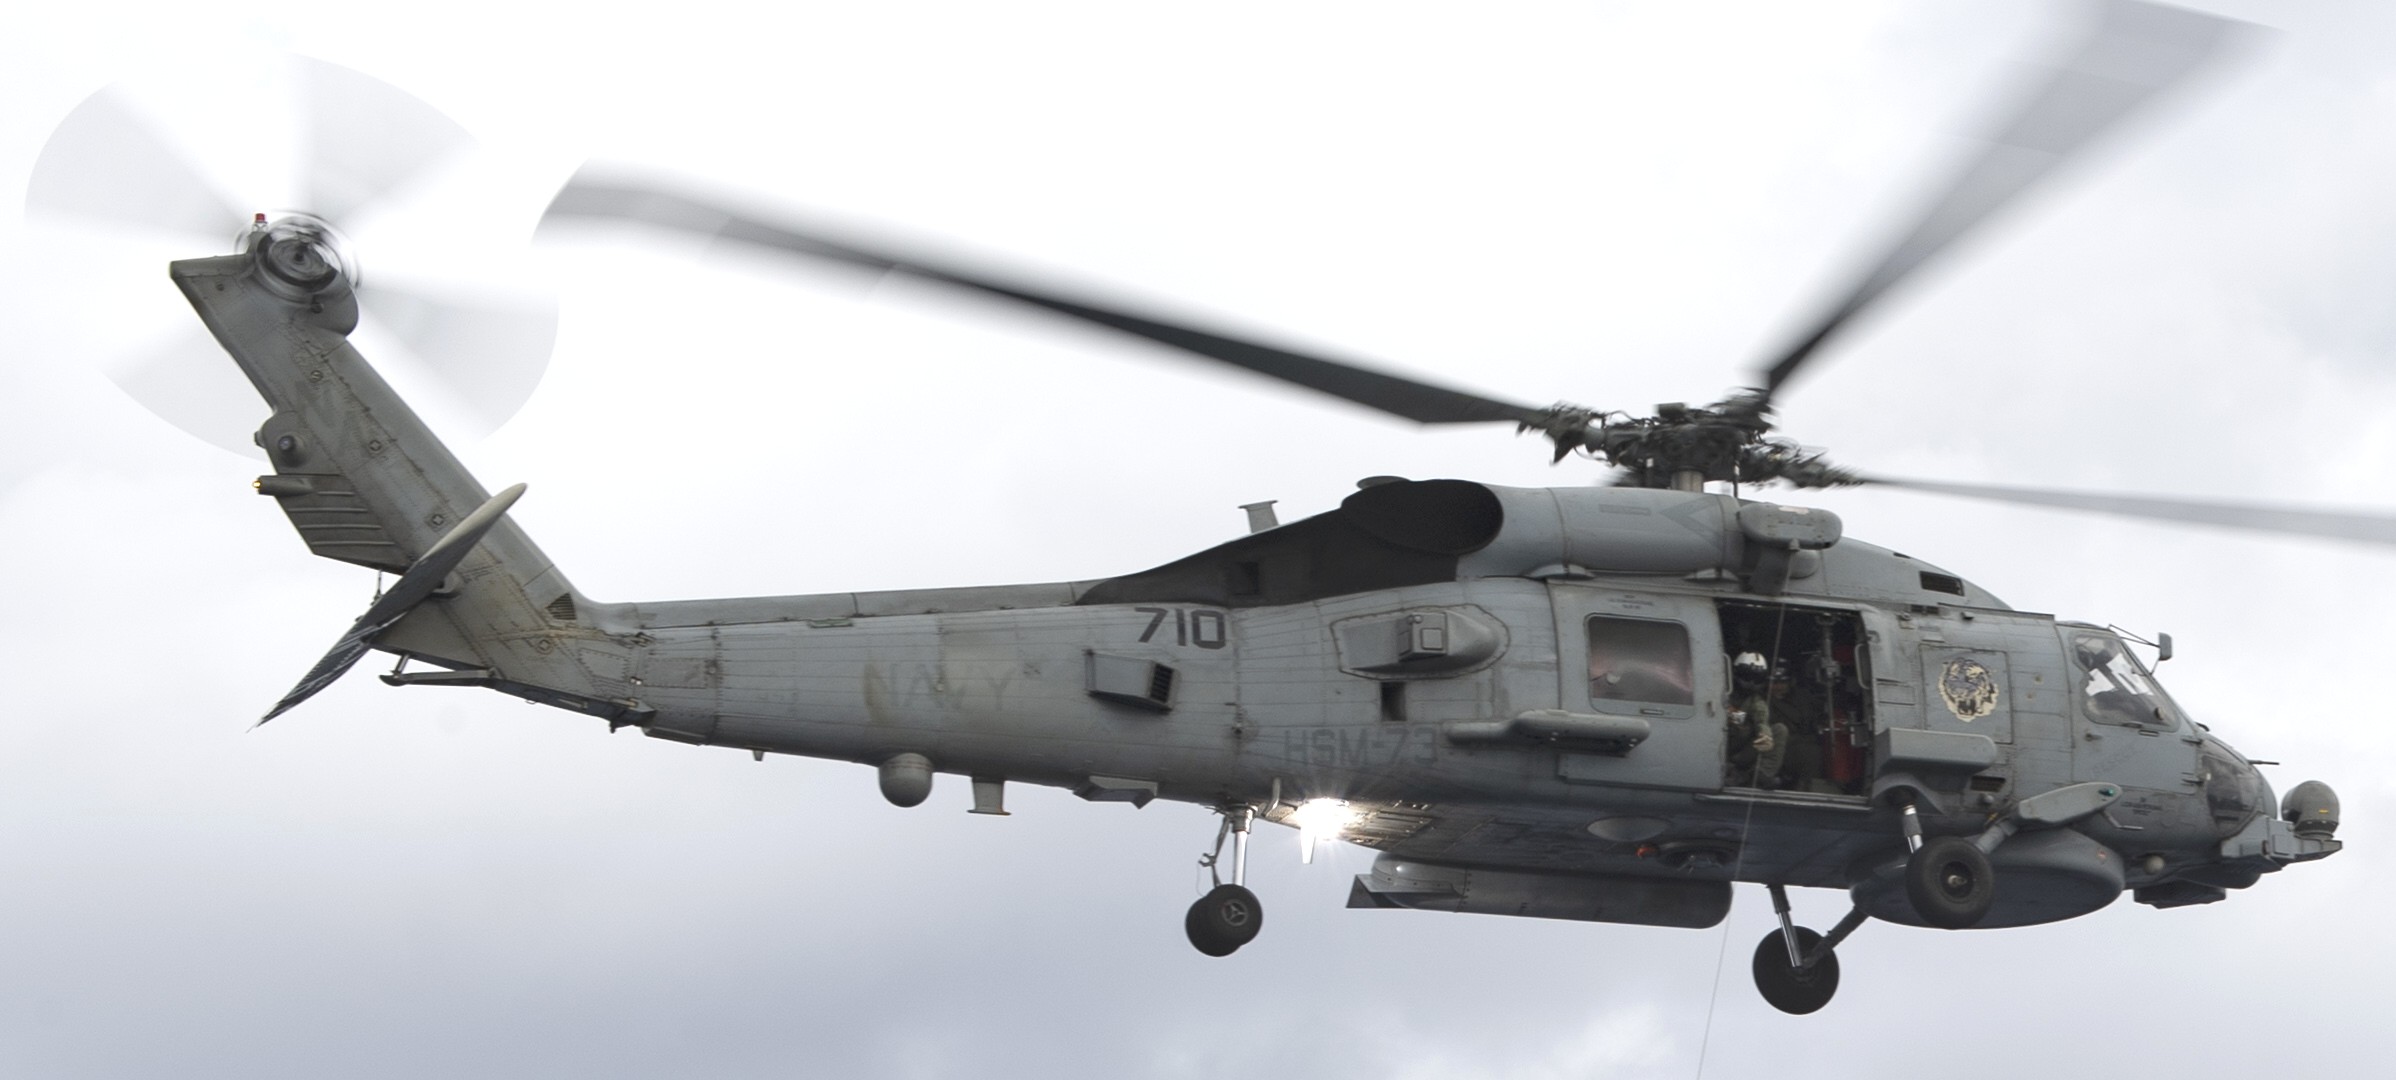 hsm-73 battlecats helicopter maritime strike squadron us navy mh-60r seahawk 2015 59